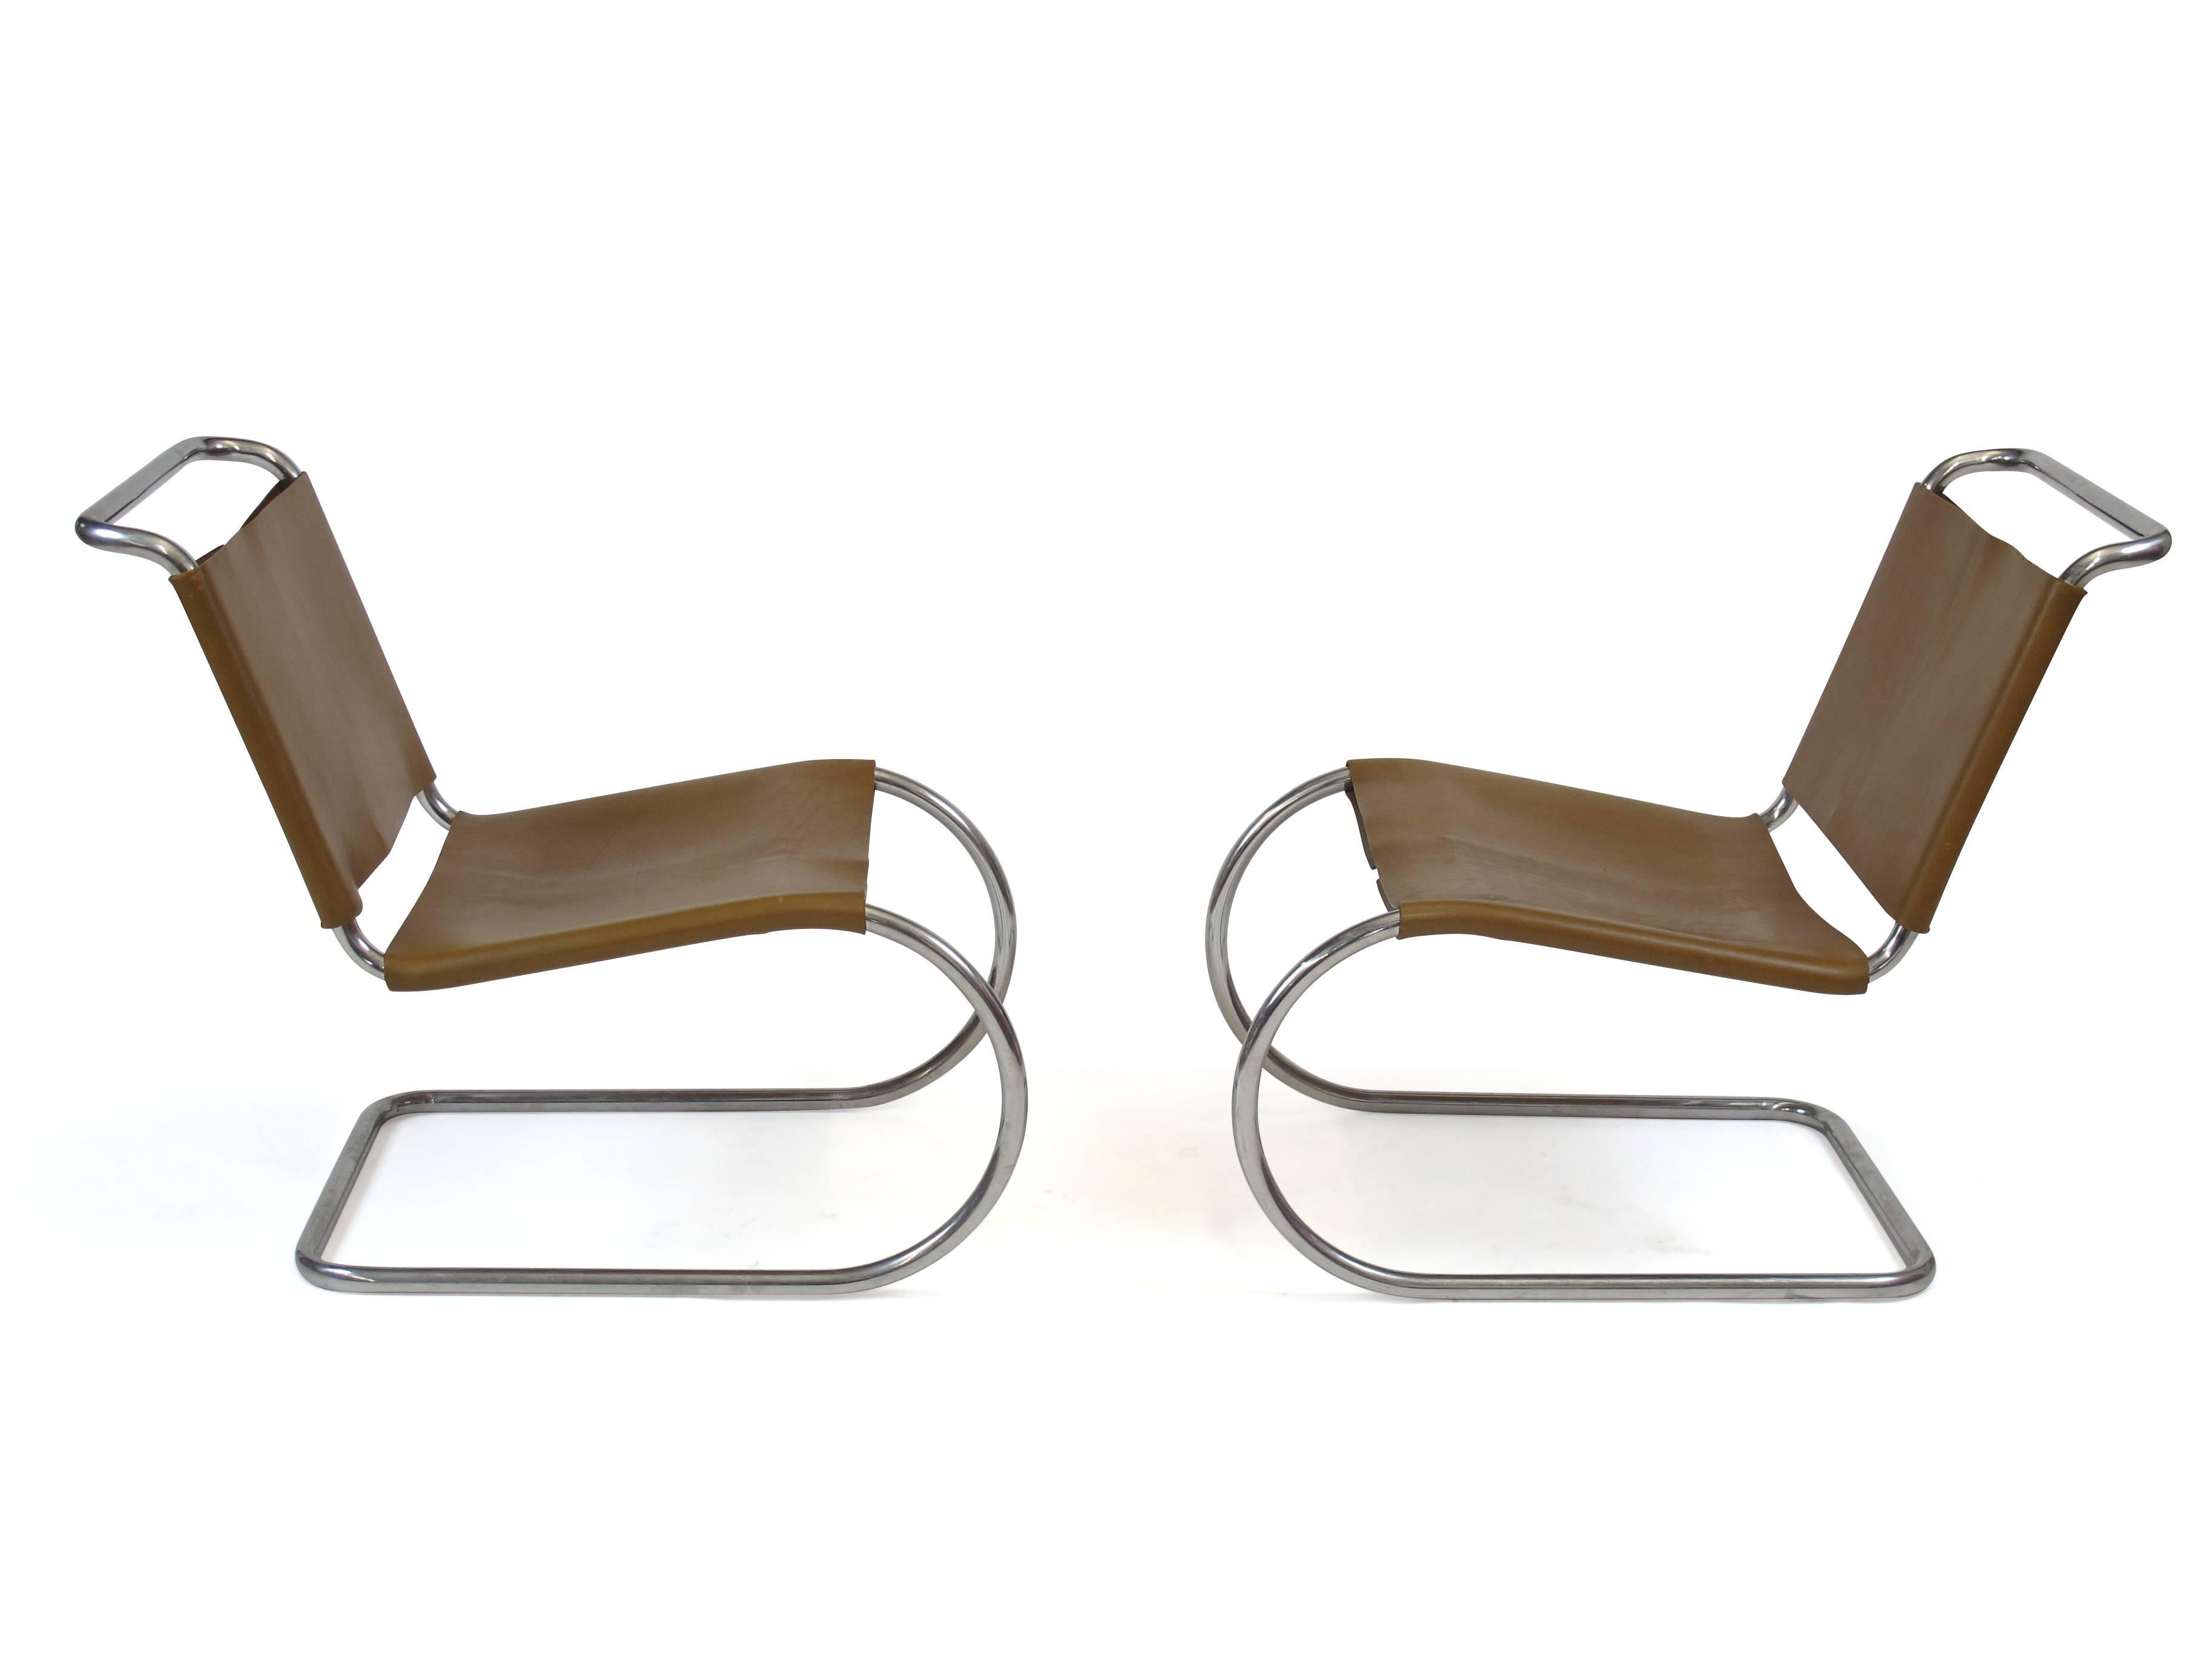 Mid-Century MR lounge chairs by Ludwig Mies van der Rohe for Knoll International. Original leather. Knoll label.